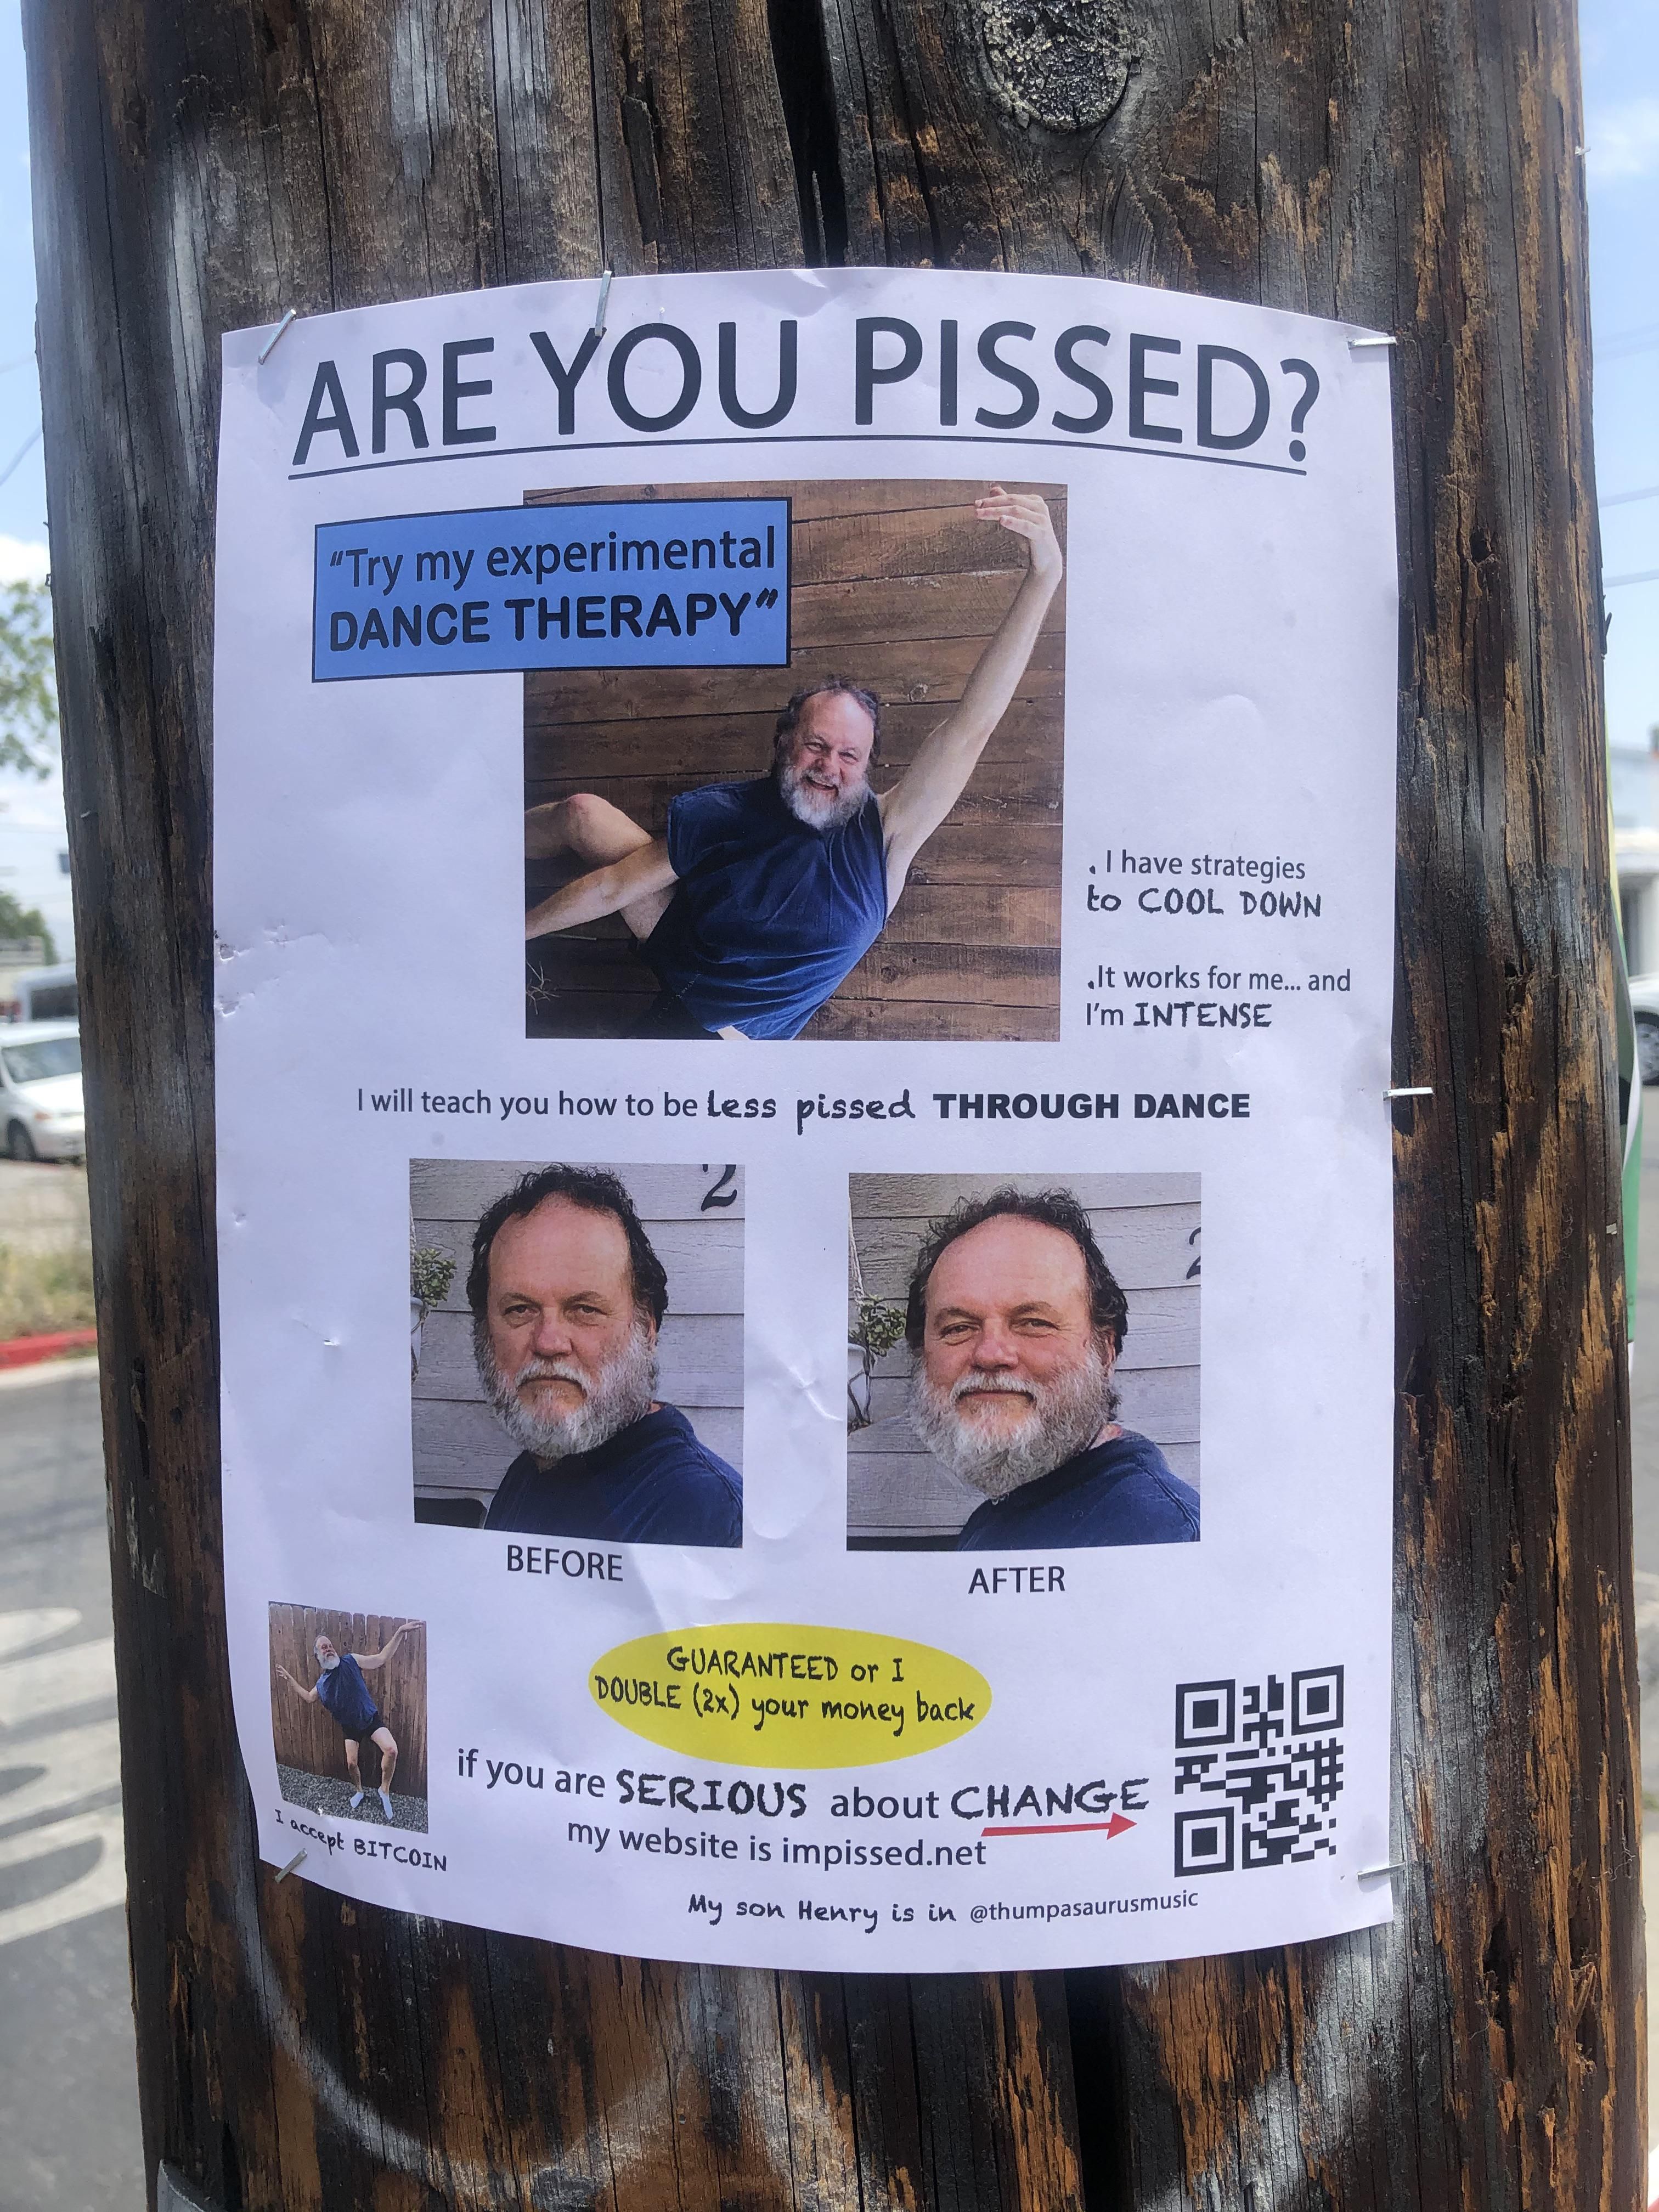 “Are You Pissed?” Advertisement found in Los Angeles